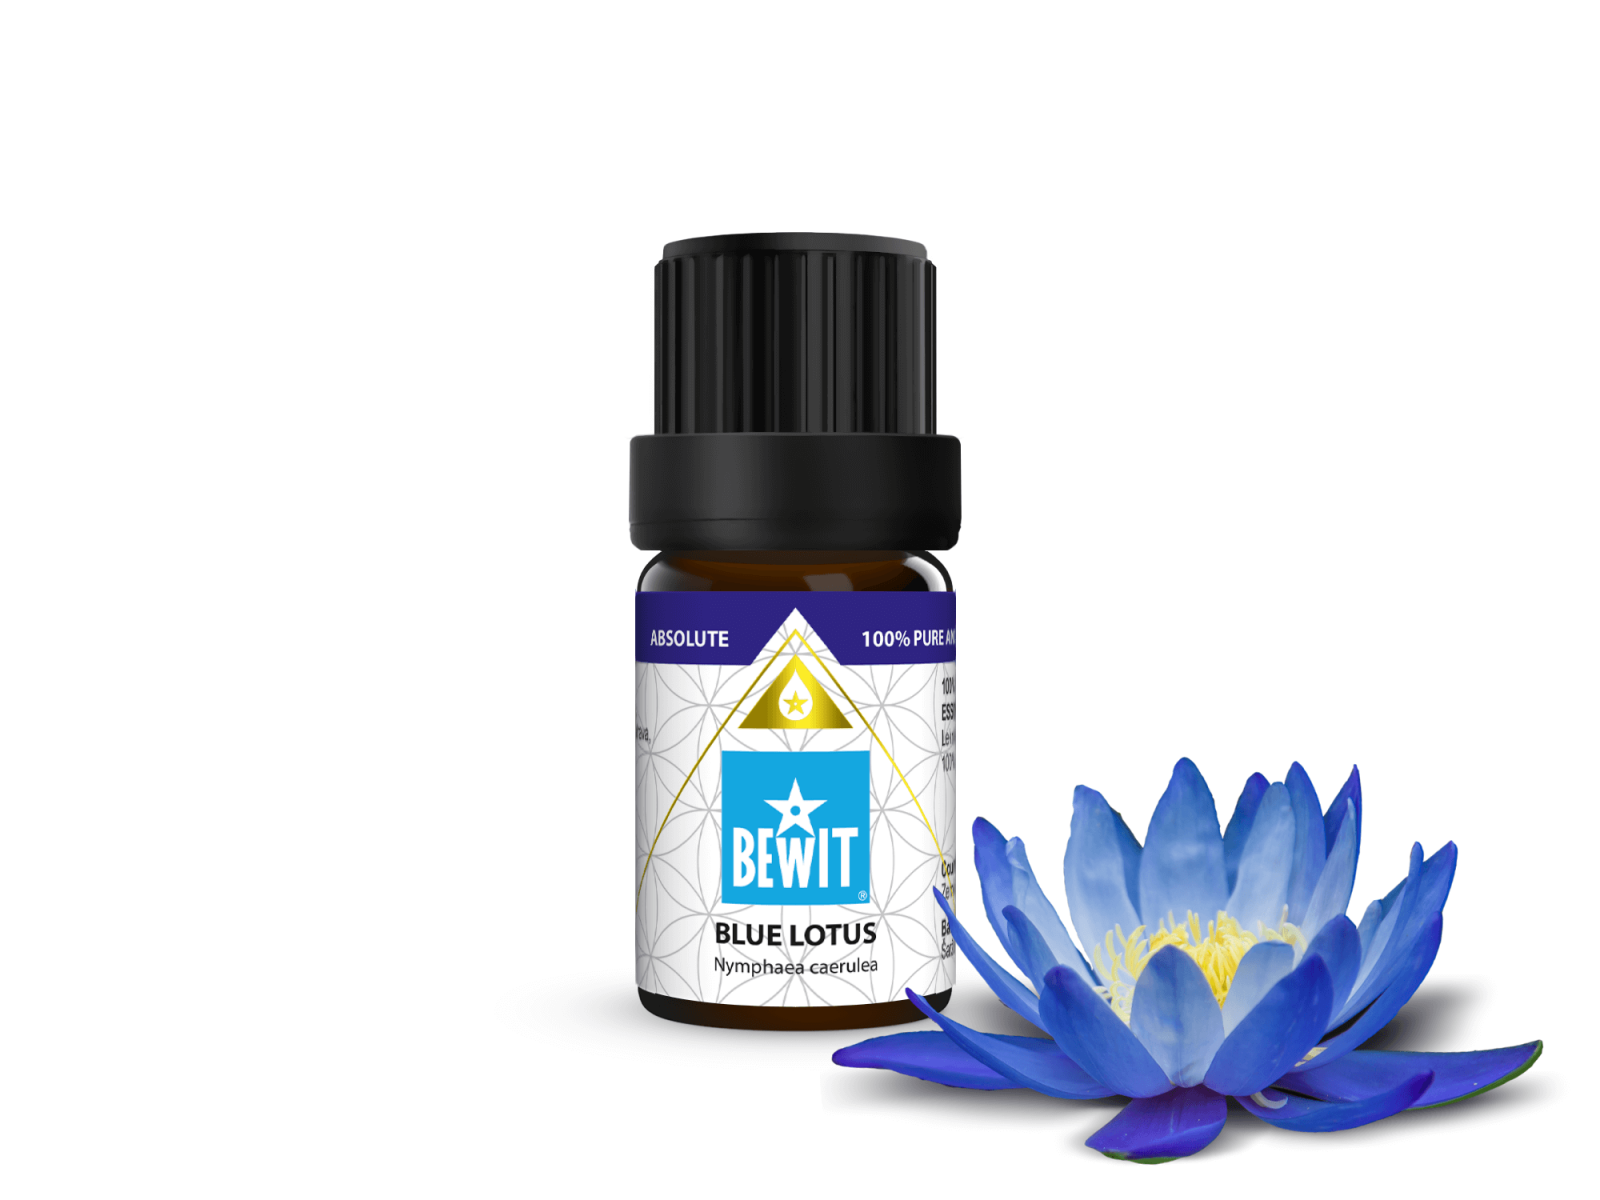 BEWIT Blue Lotus ABSOLUE - 100% pure and natural essential oil - 1